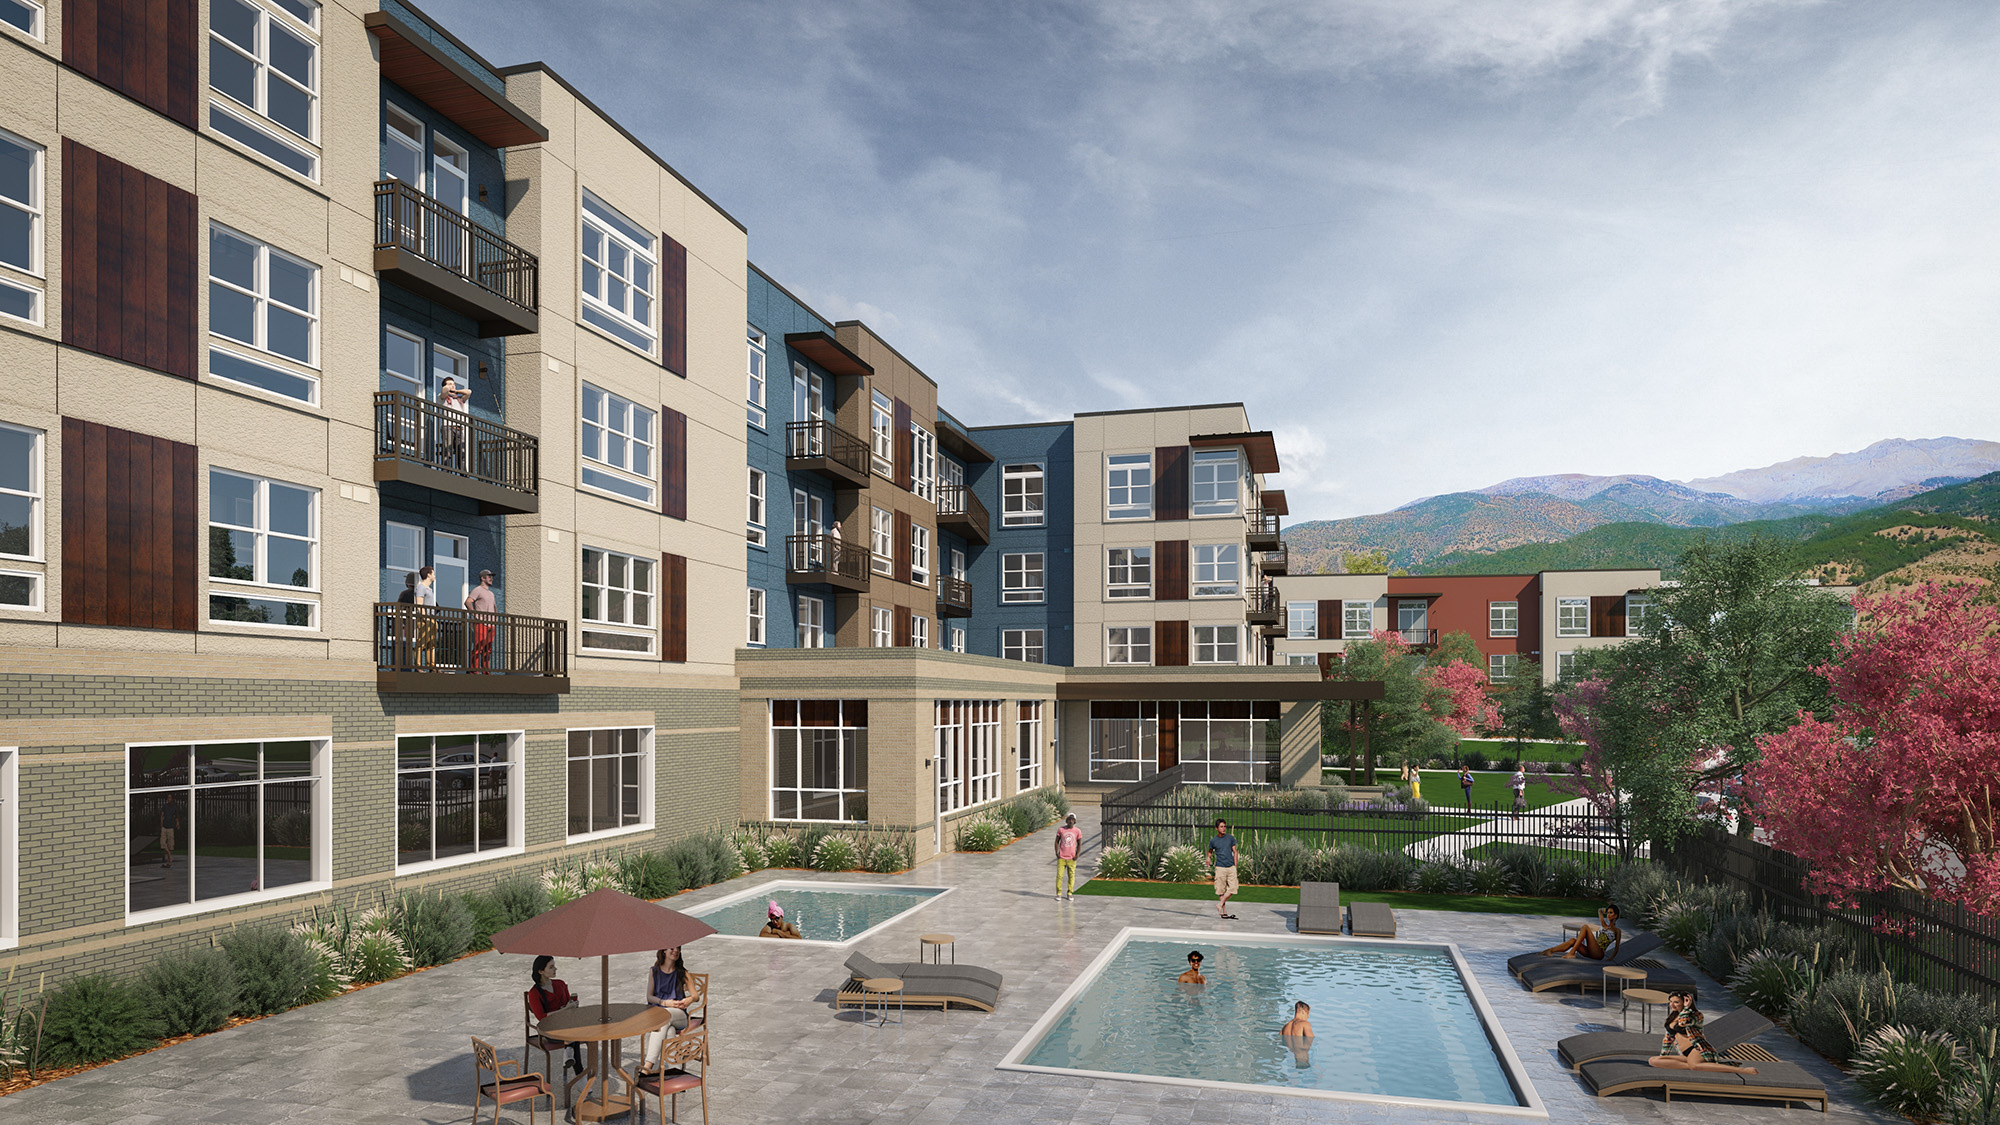 rendering of 4 storey apartment building overlooking pool area with deck, hot tub, seating, planting and mountains in background